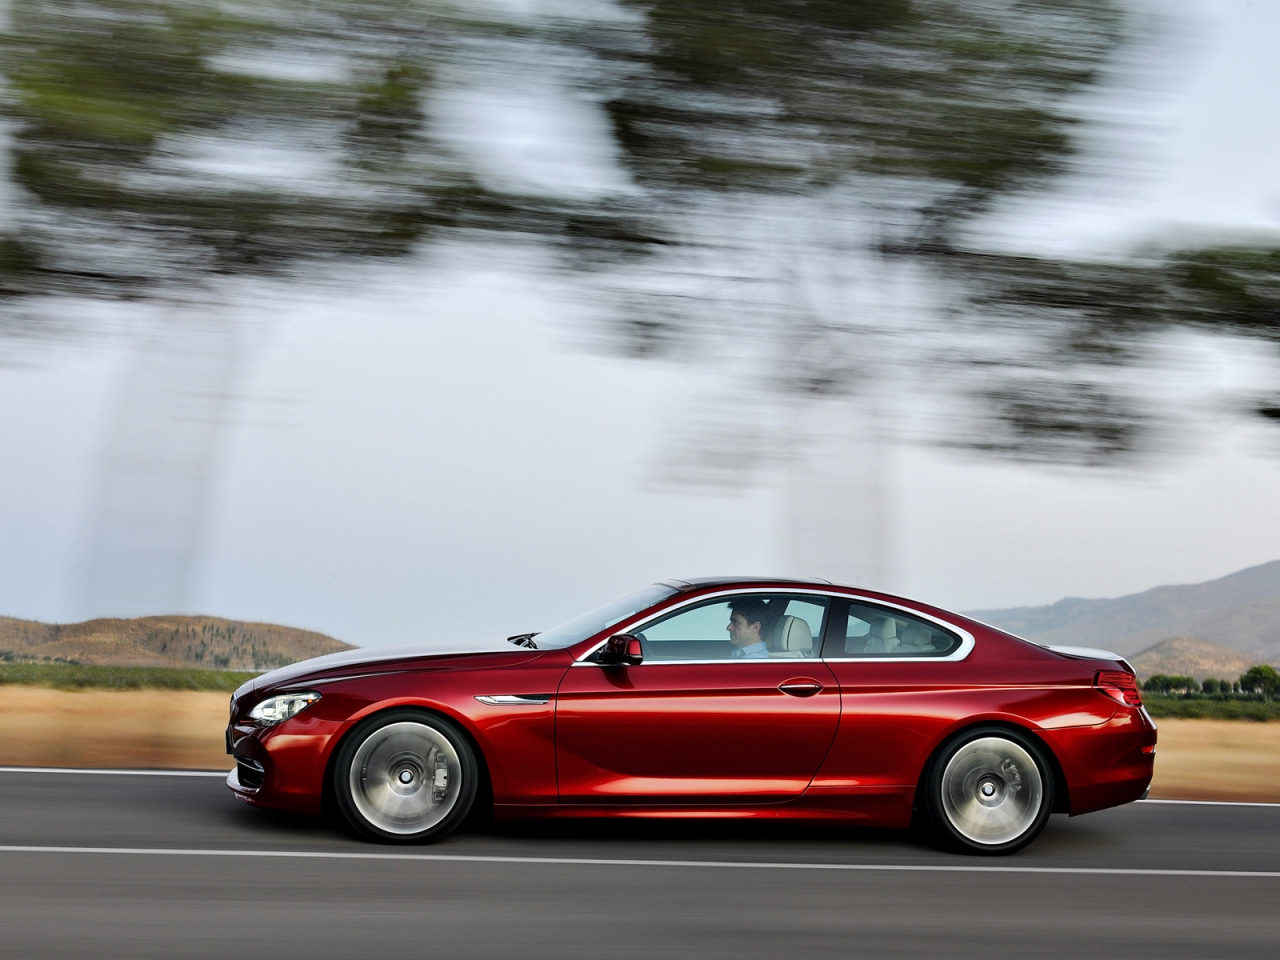 BMW 650i Coupe 2012 for 1280 x 960 resolution